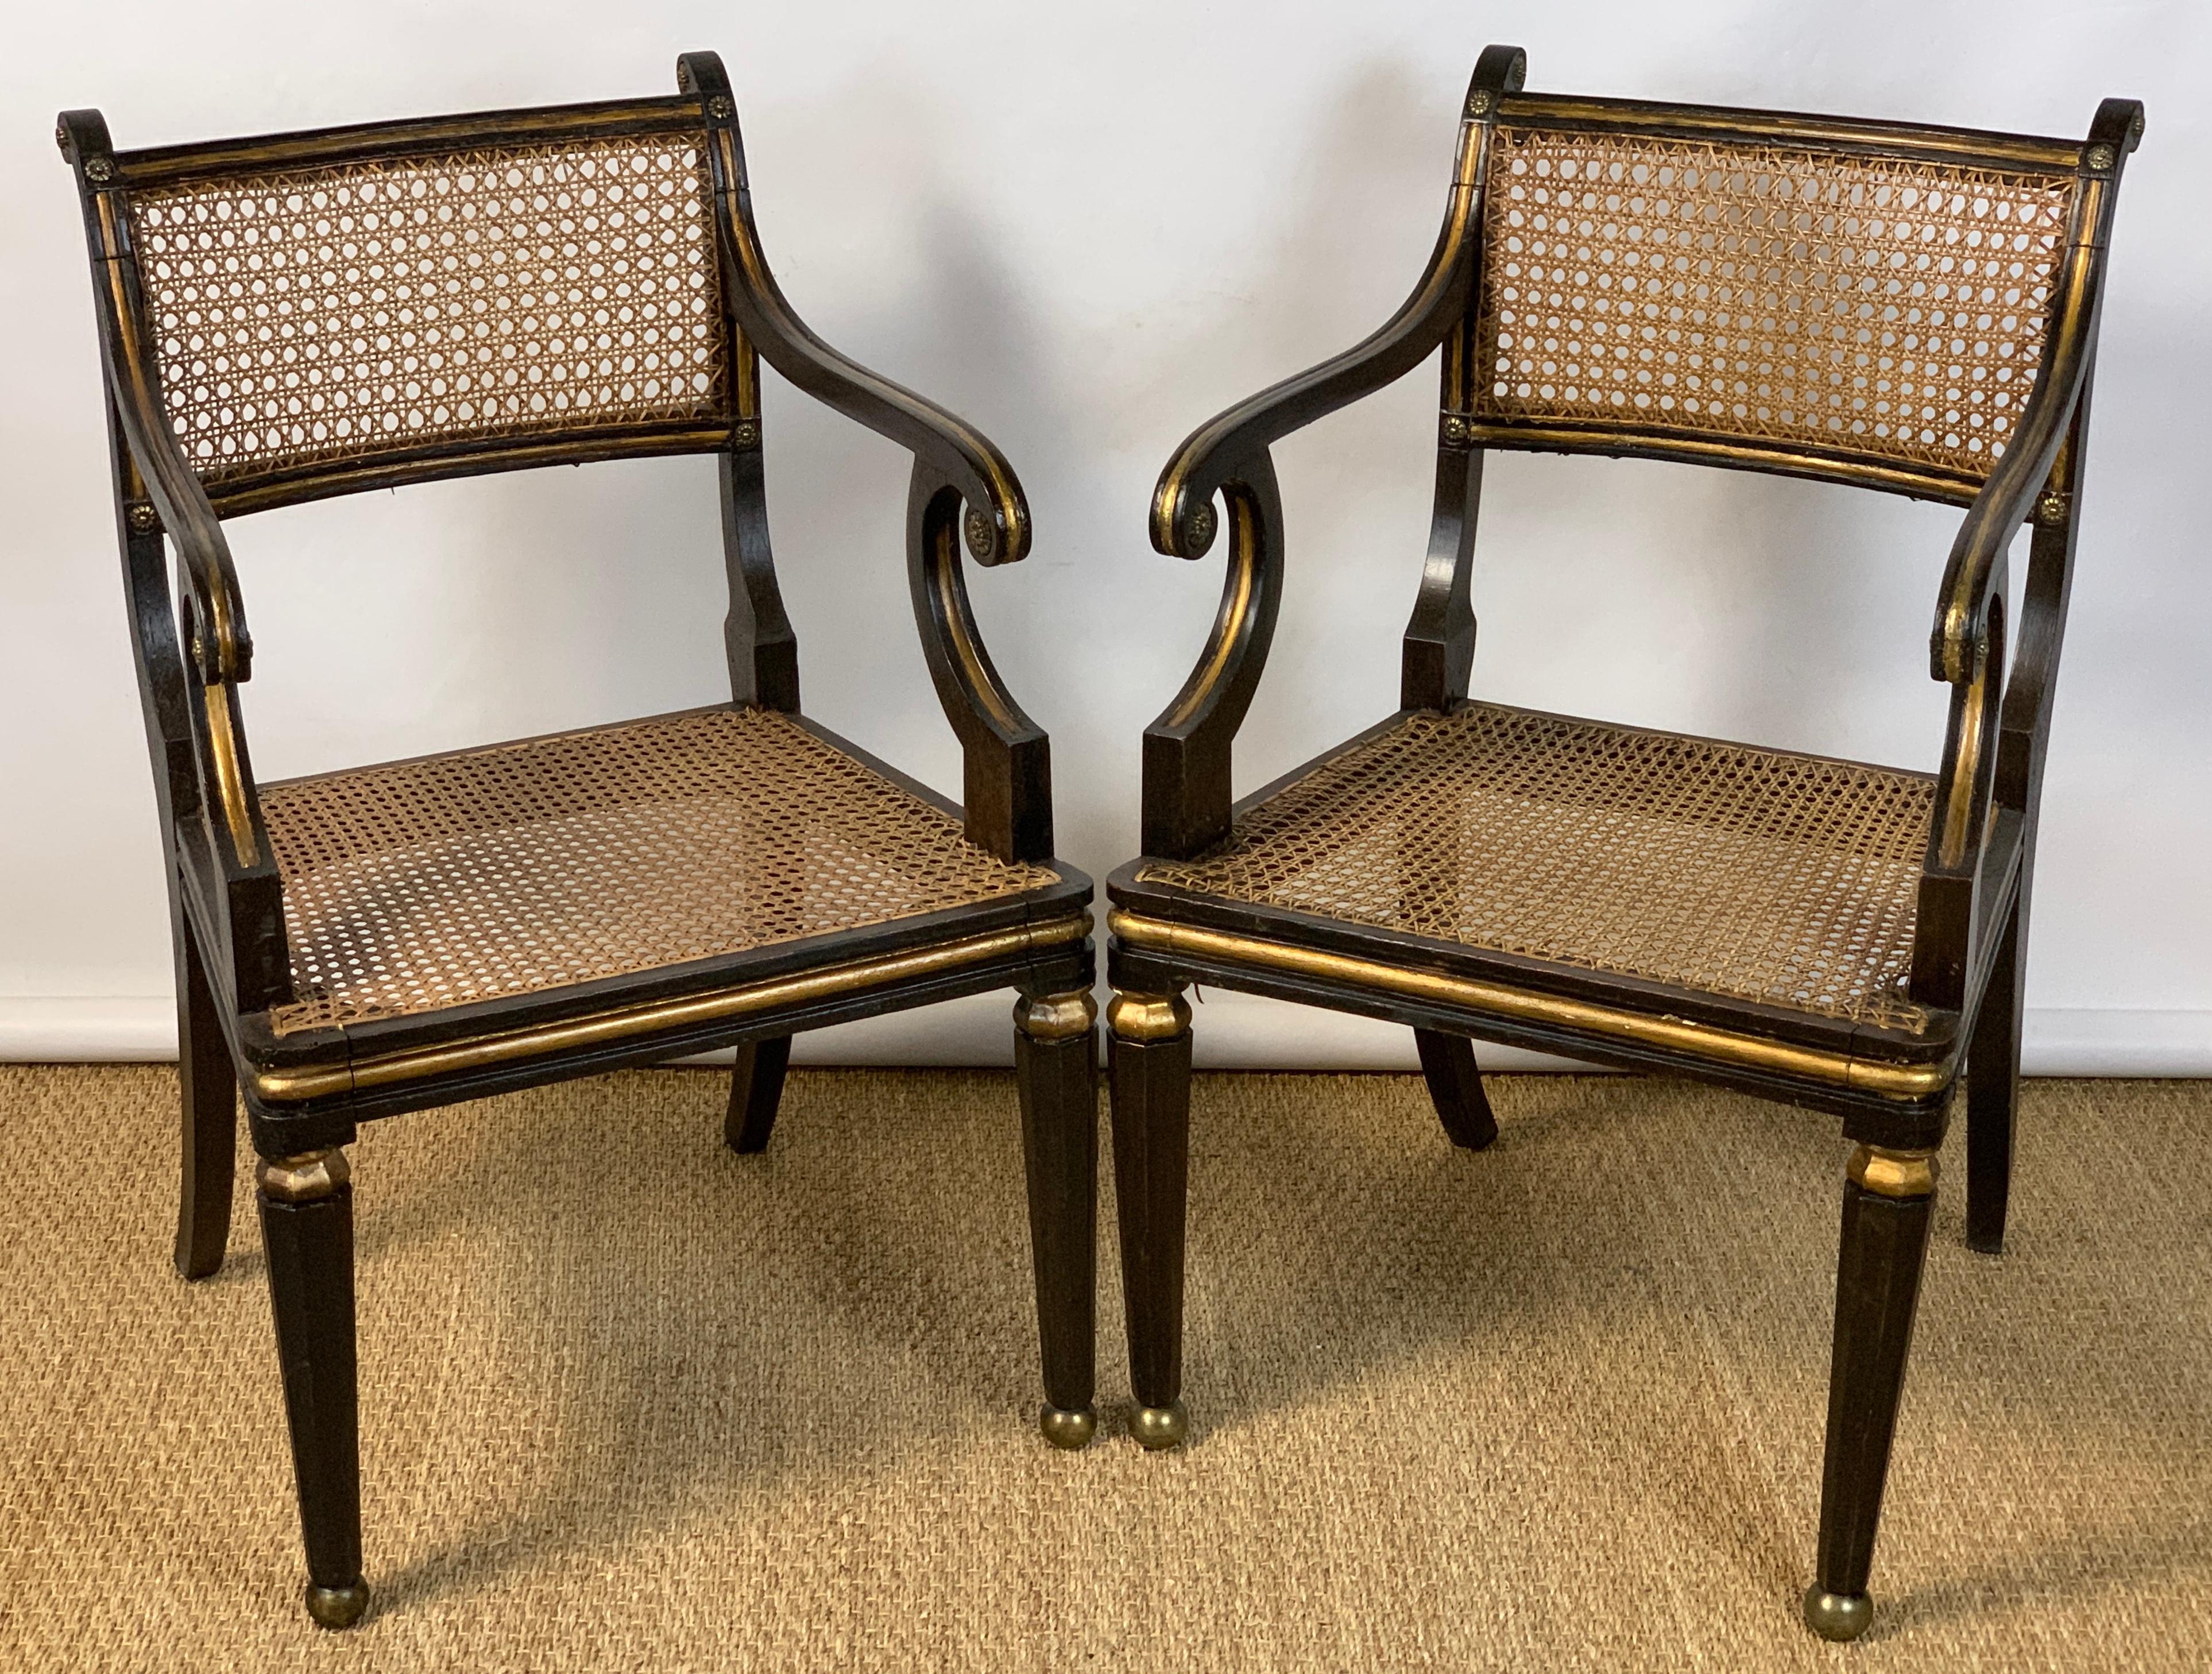 Carved Pair of English Regency Ebonized and Gilded Armchairs